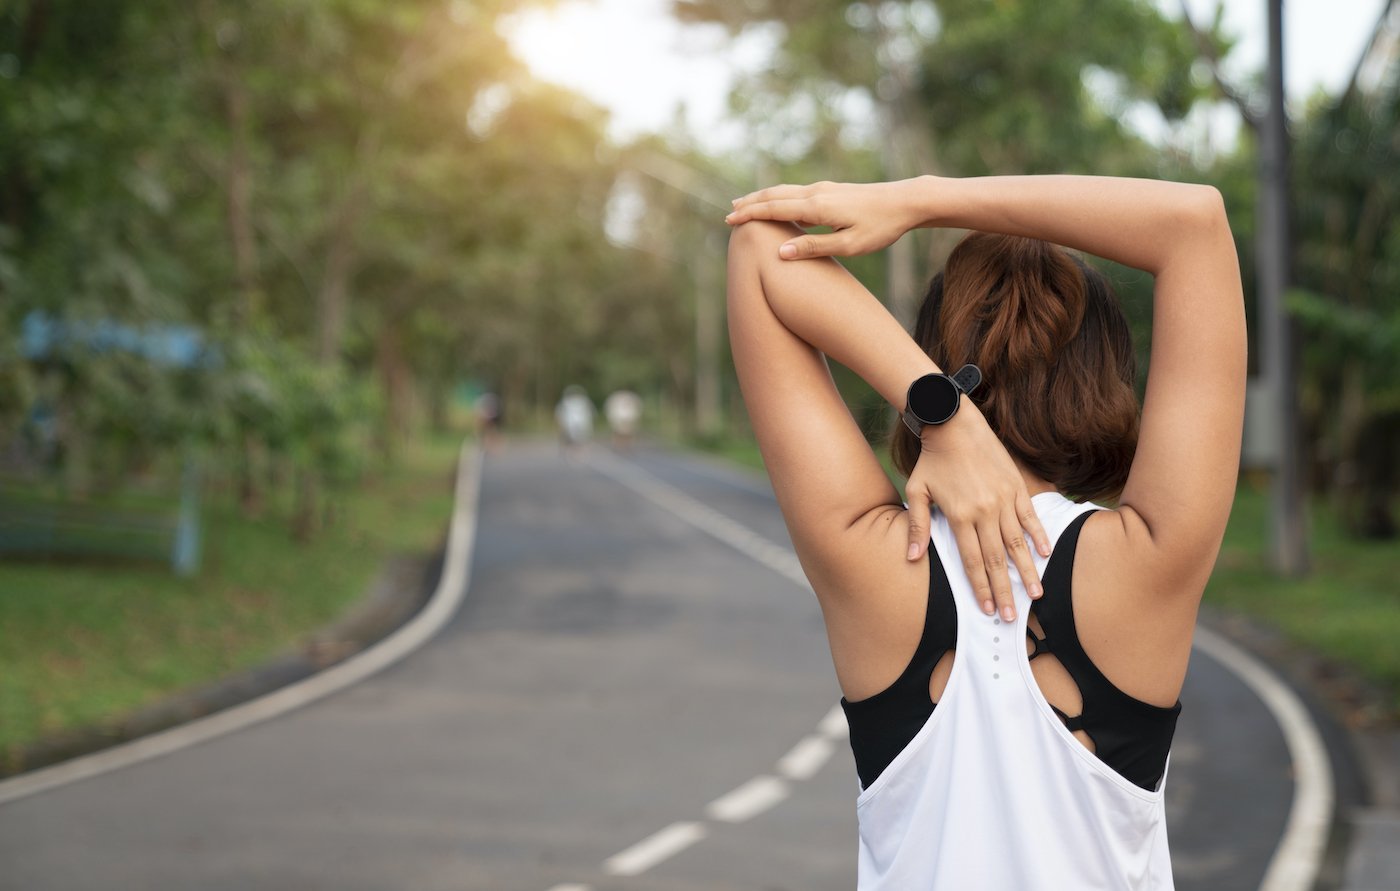 Shoulder Impingement Exercises Trainers Say Will Get Rid of the (Literal) Pain